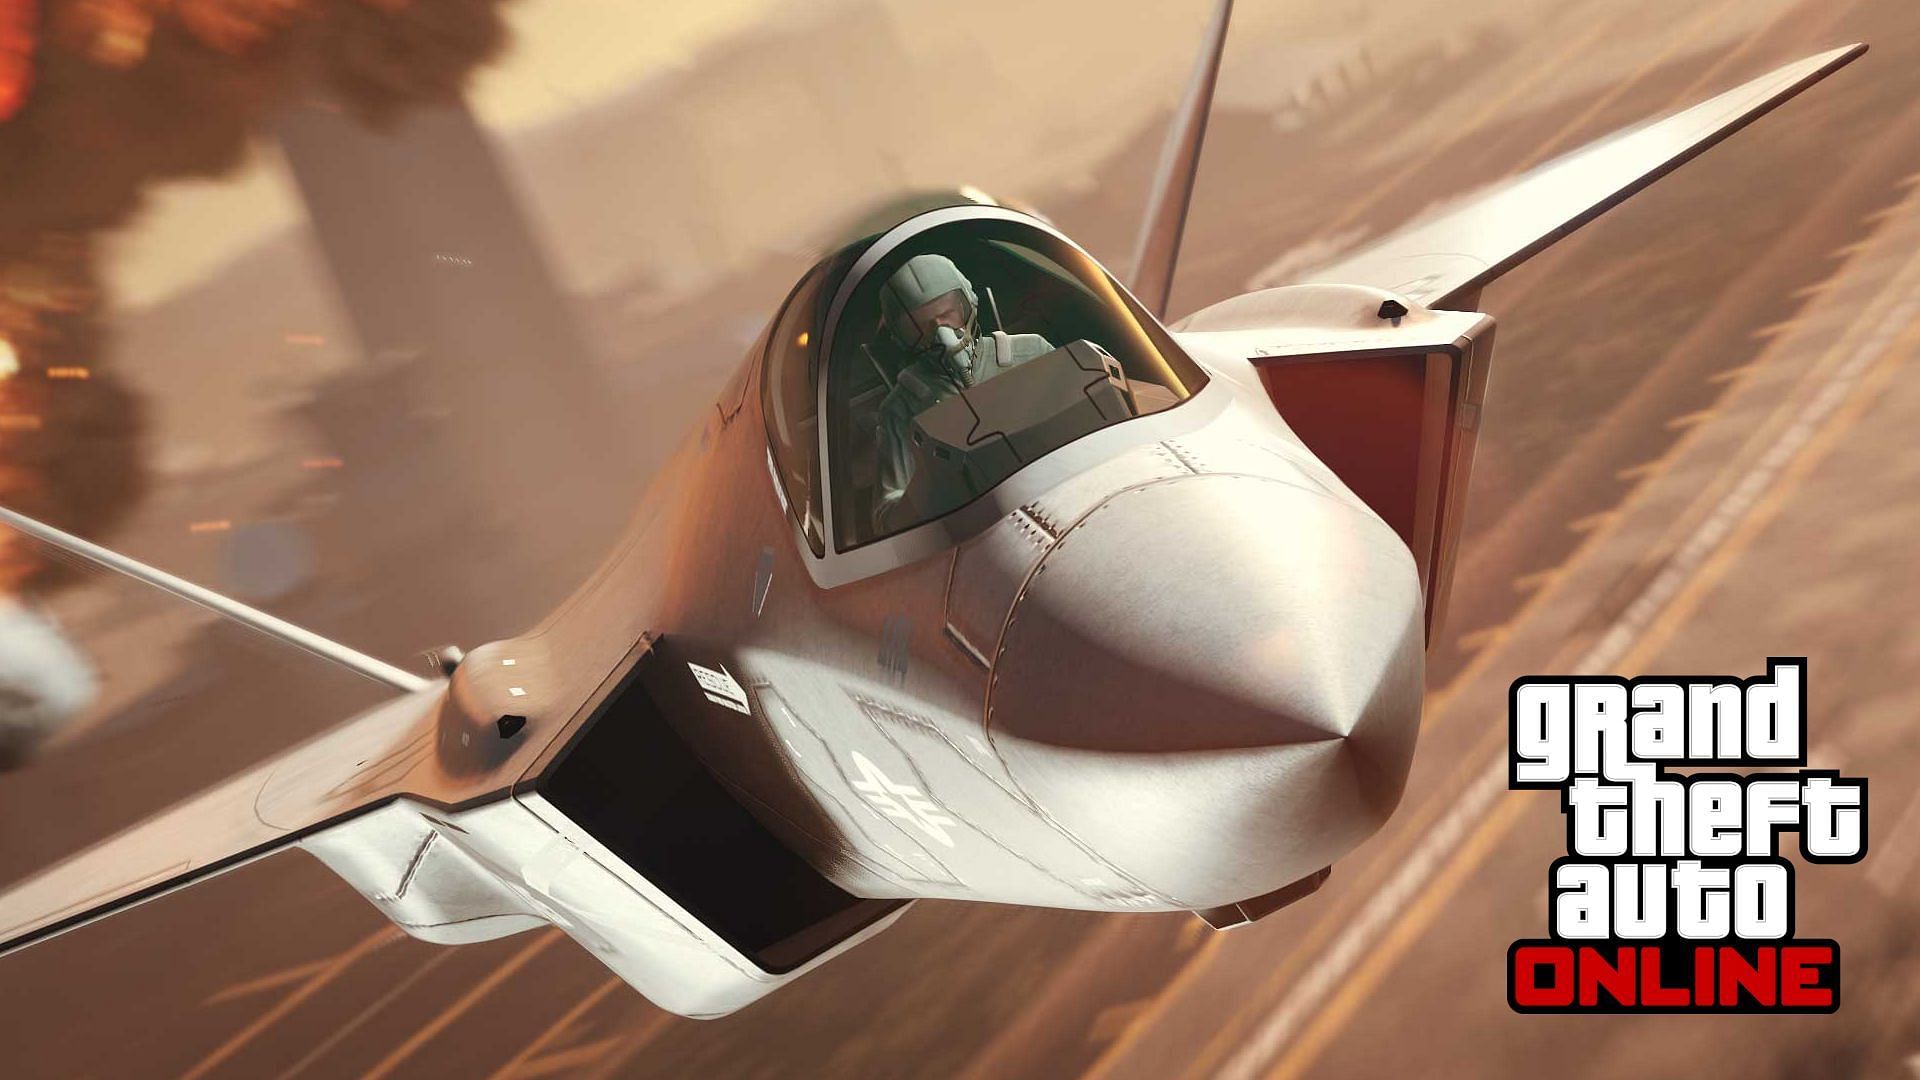 Gta 6 Online B11 Strike Force Date Sortie Ps4 GTA Online seemingly adding a new F-35 jet with summer update 2023